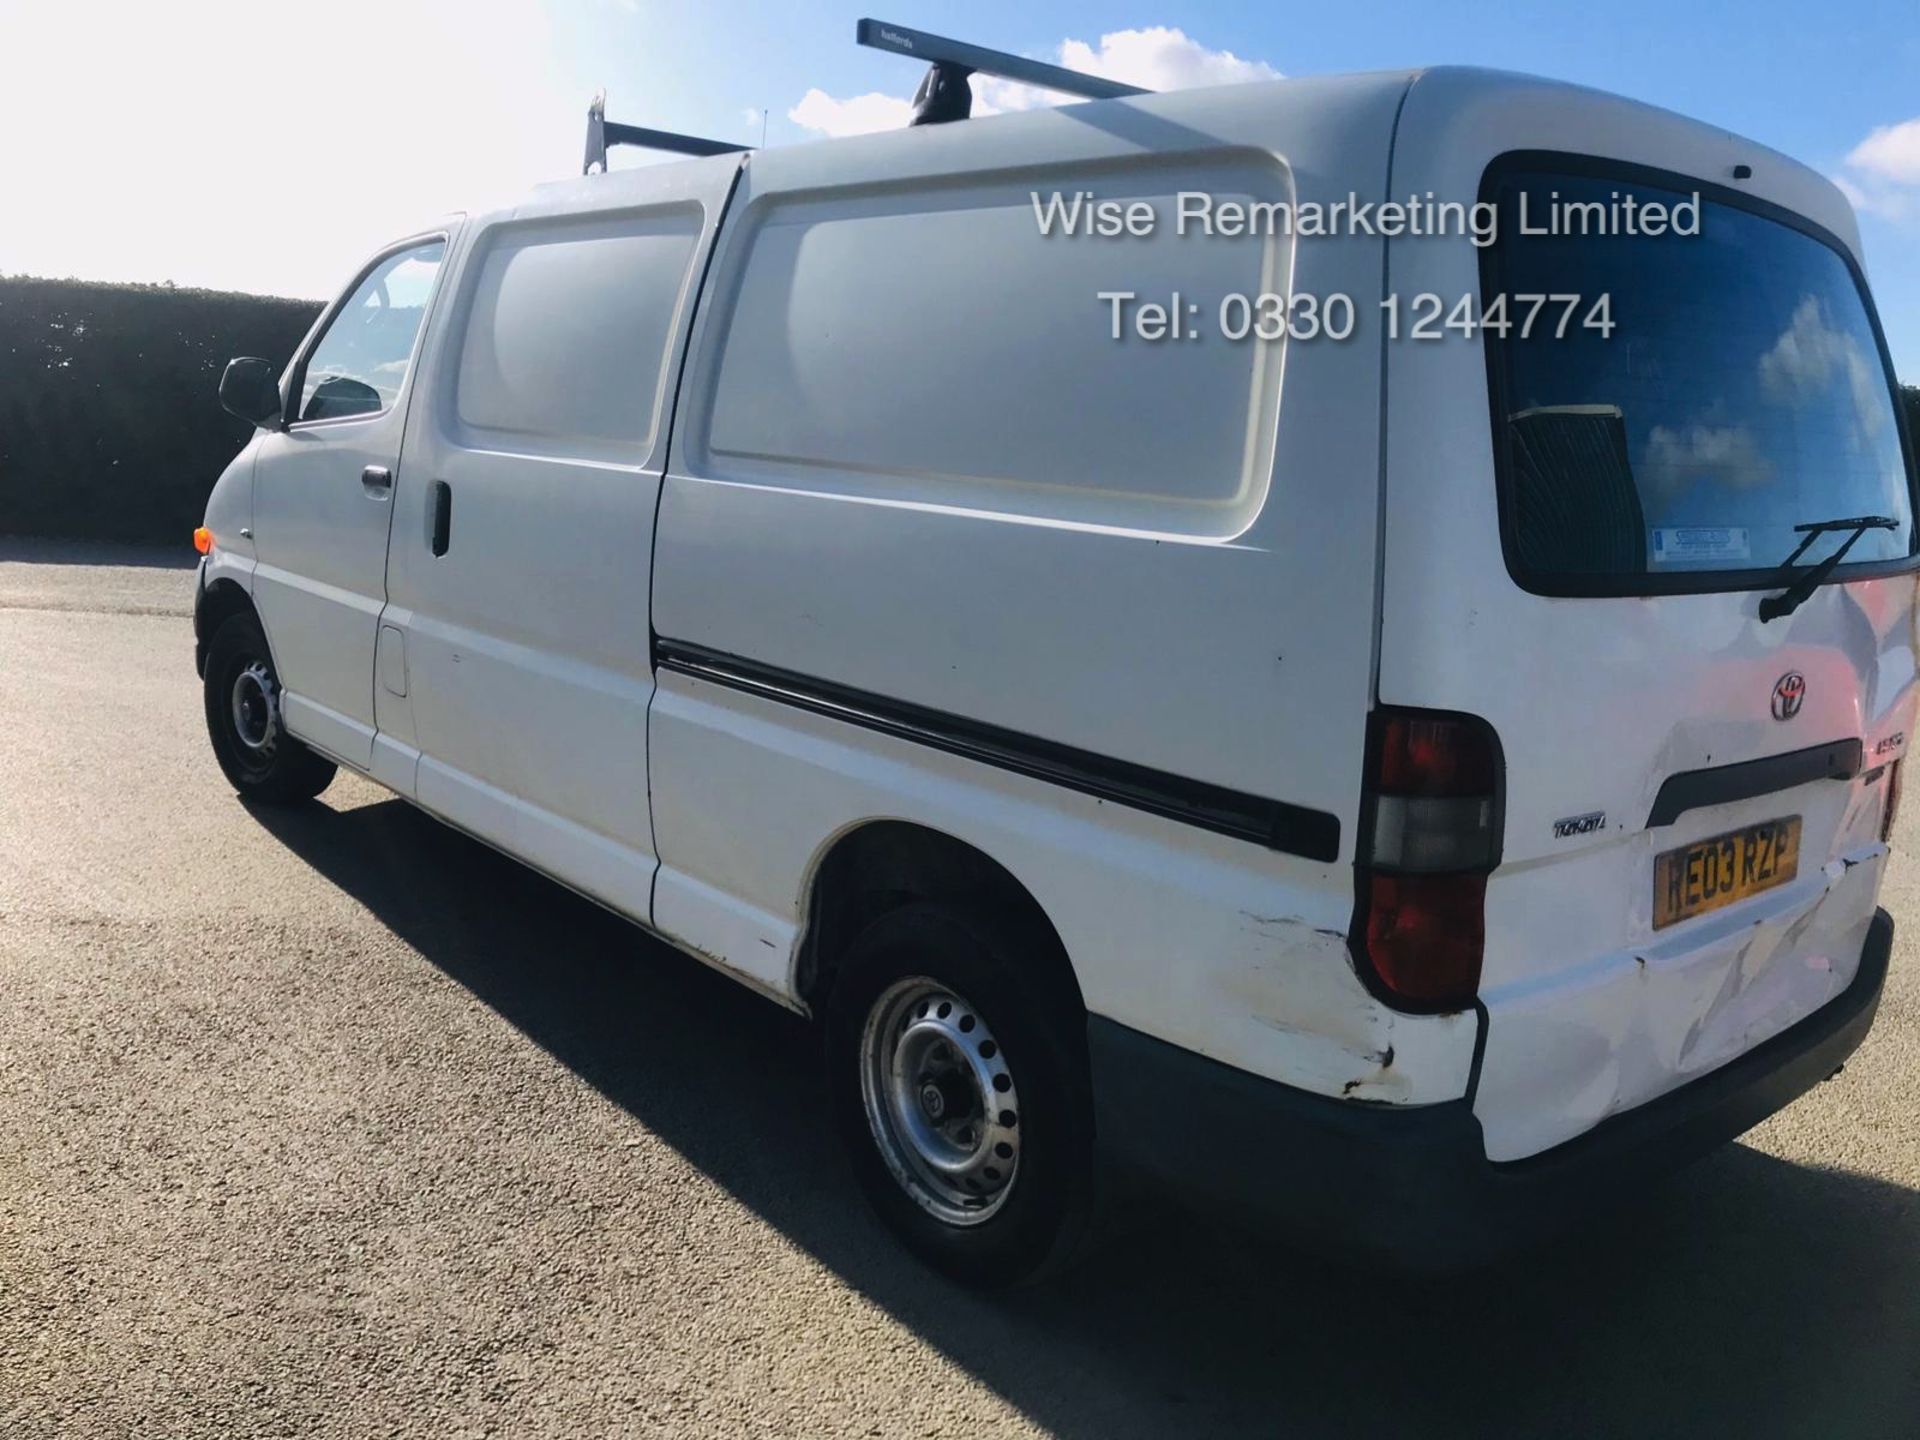 Toyota Hiace 300 GS 2.5 D4D - 2003 03 Reg - 1 Keeper From New - 3 Seater - Roof Rack - Image 3 of 15